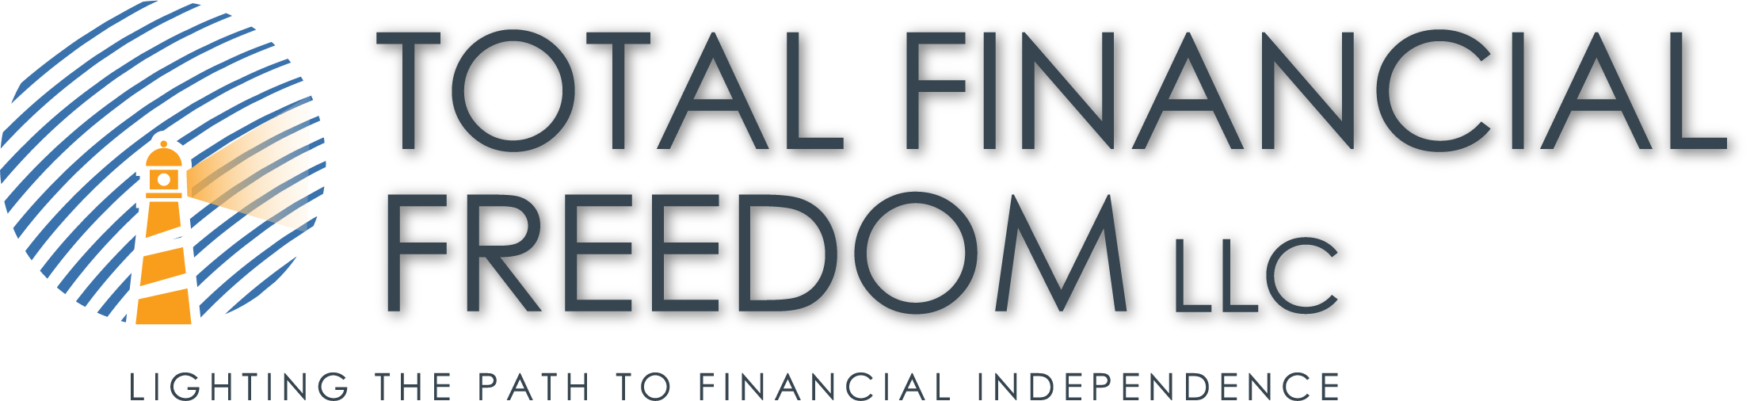 Total Financial Freedom